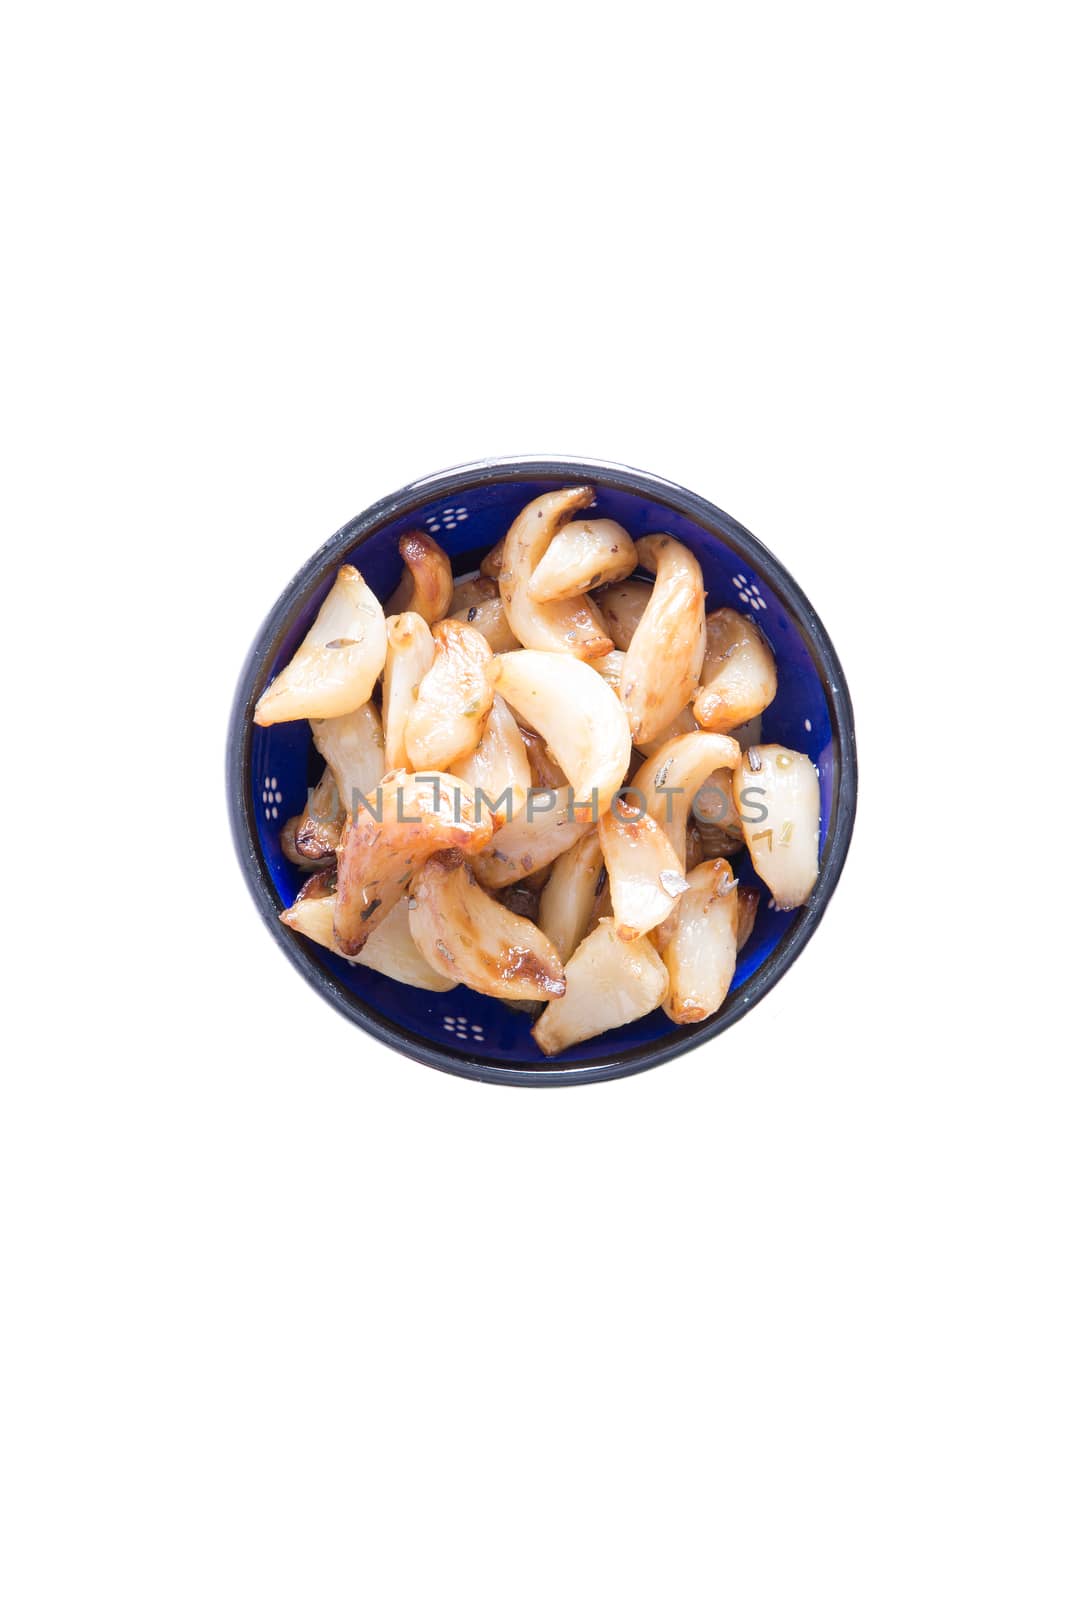 Healthy marinated oven roasted garlic cloves by coskun